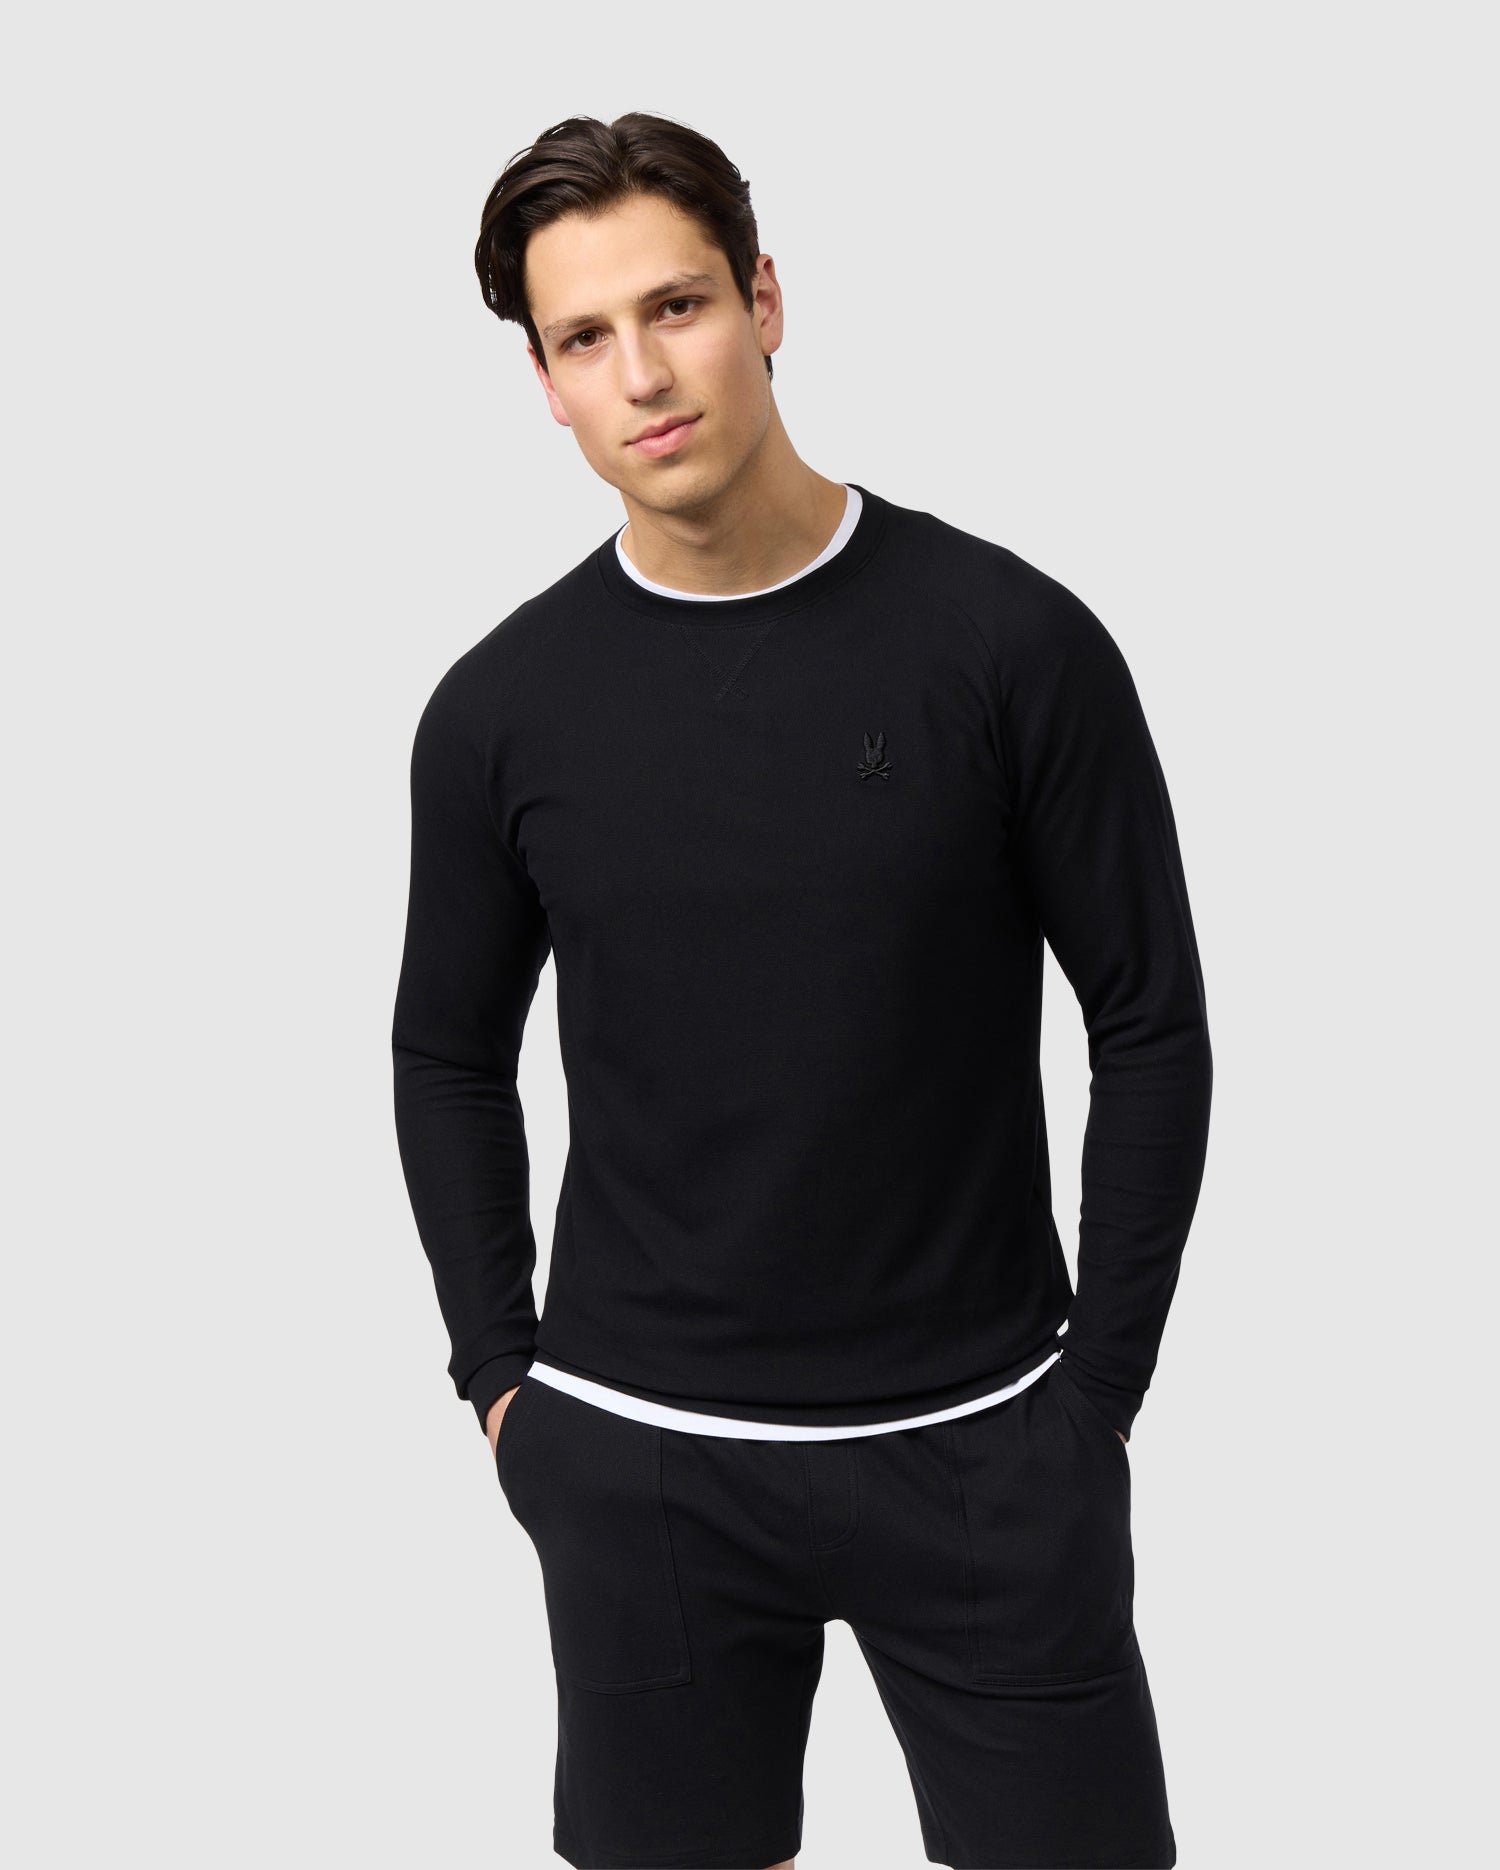 A man wearing a Psycho Bunny MENS STANFORD LONG SLEEVE PIQUE TEE - B6T341B200 and shorts stands against a light gray background, looking directly at the camera with a neutral expression.